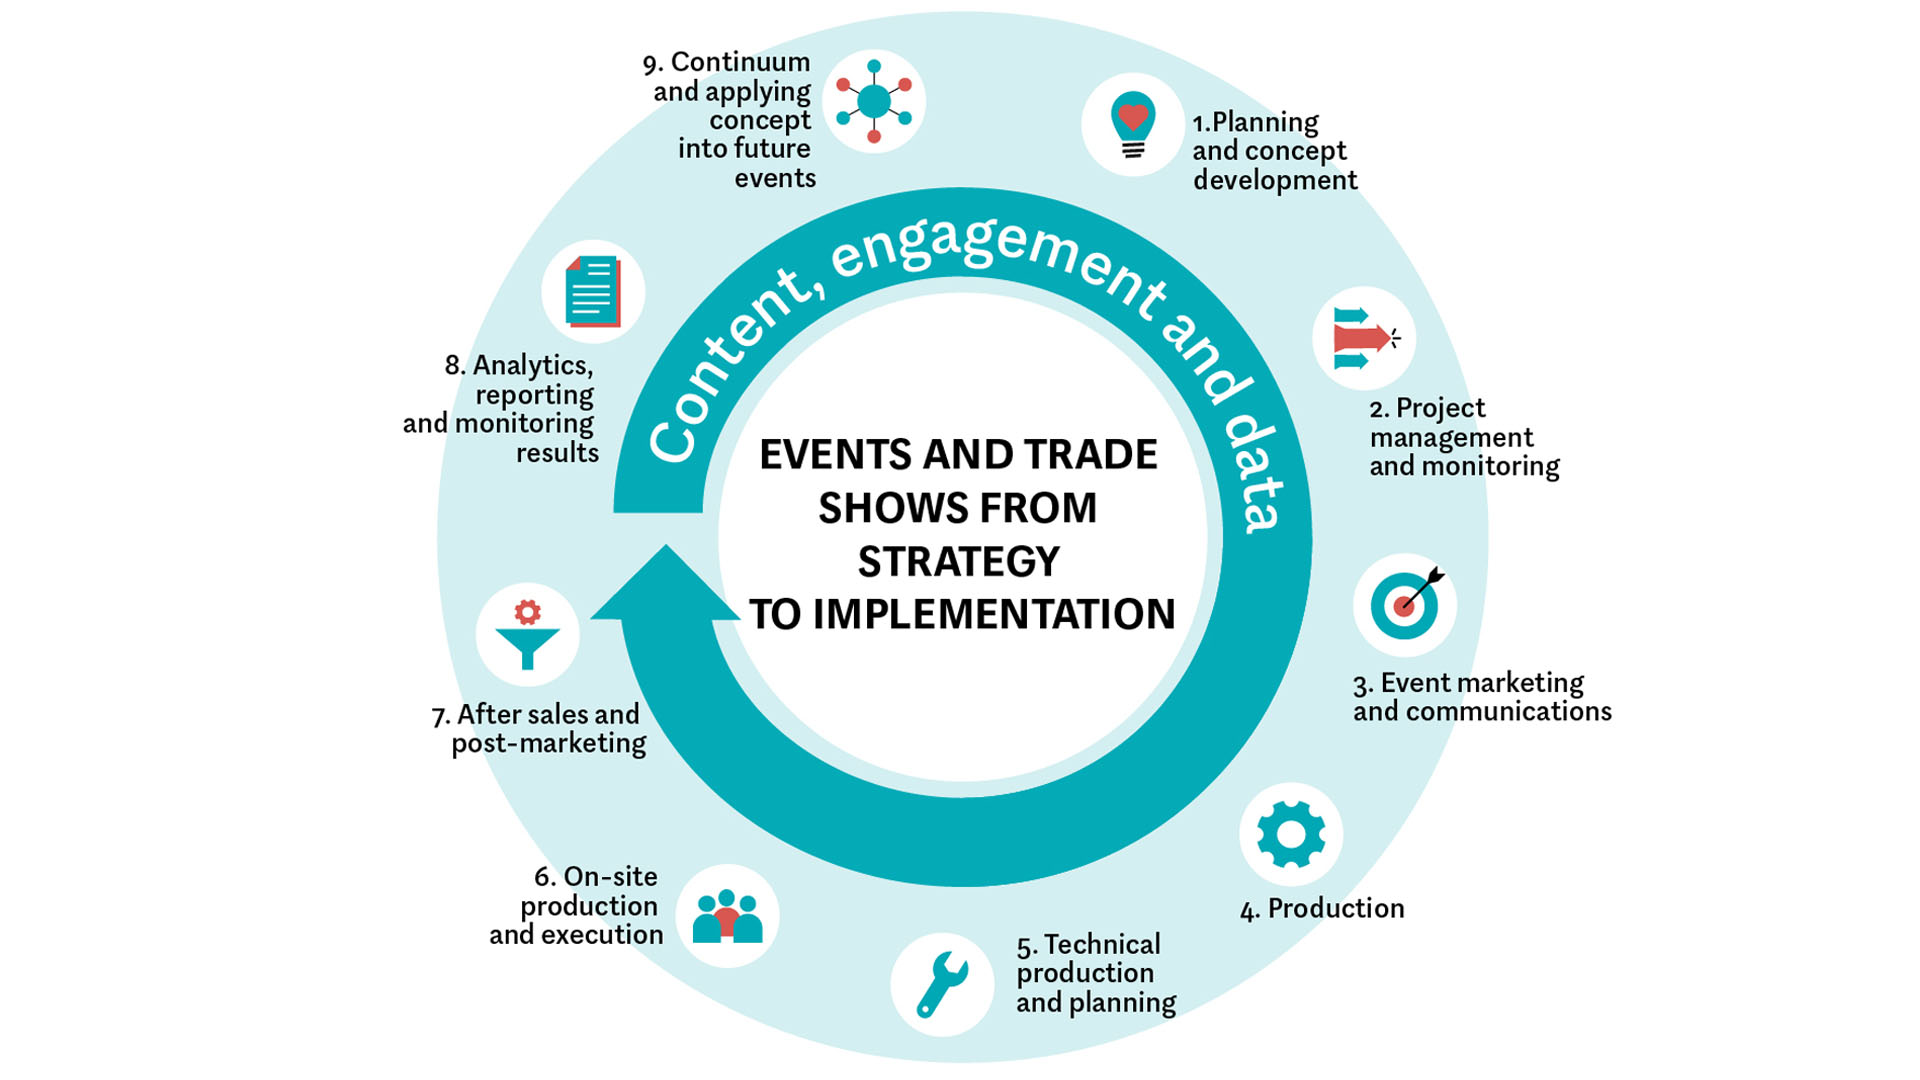 A chart illustrating events and trade shows from strategy to implementation using content, engagement and data. 